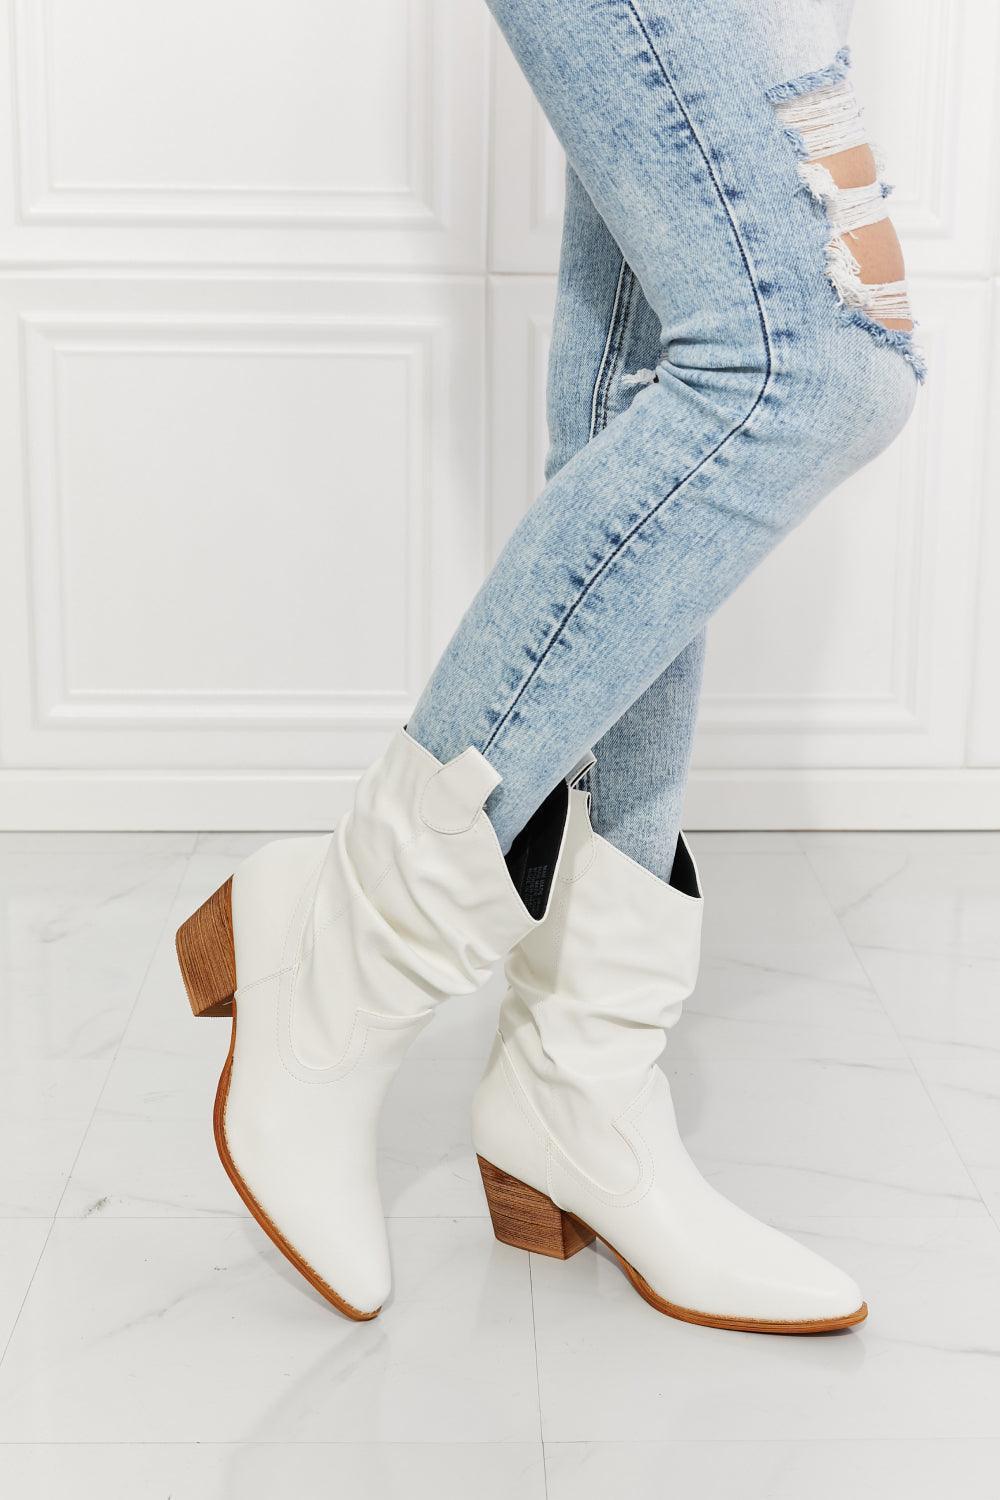 MMShoes Keep Going Point Toe Scrunch White Cowboy Boots - MXSTUDIO.COM